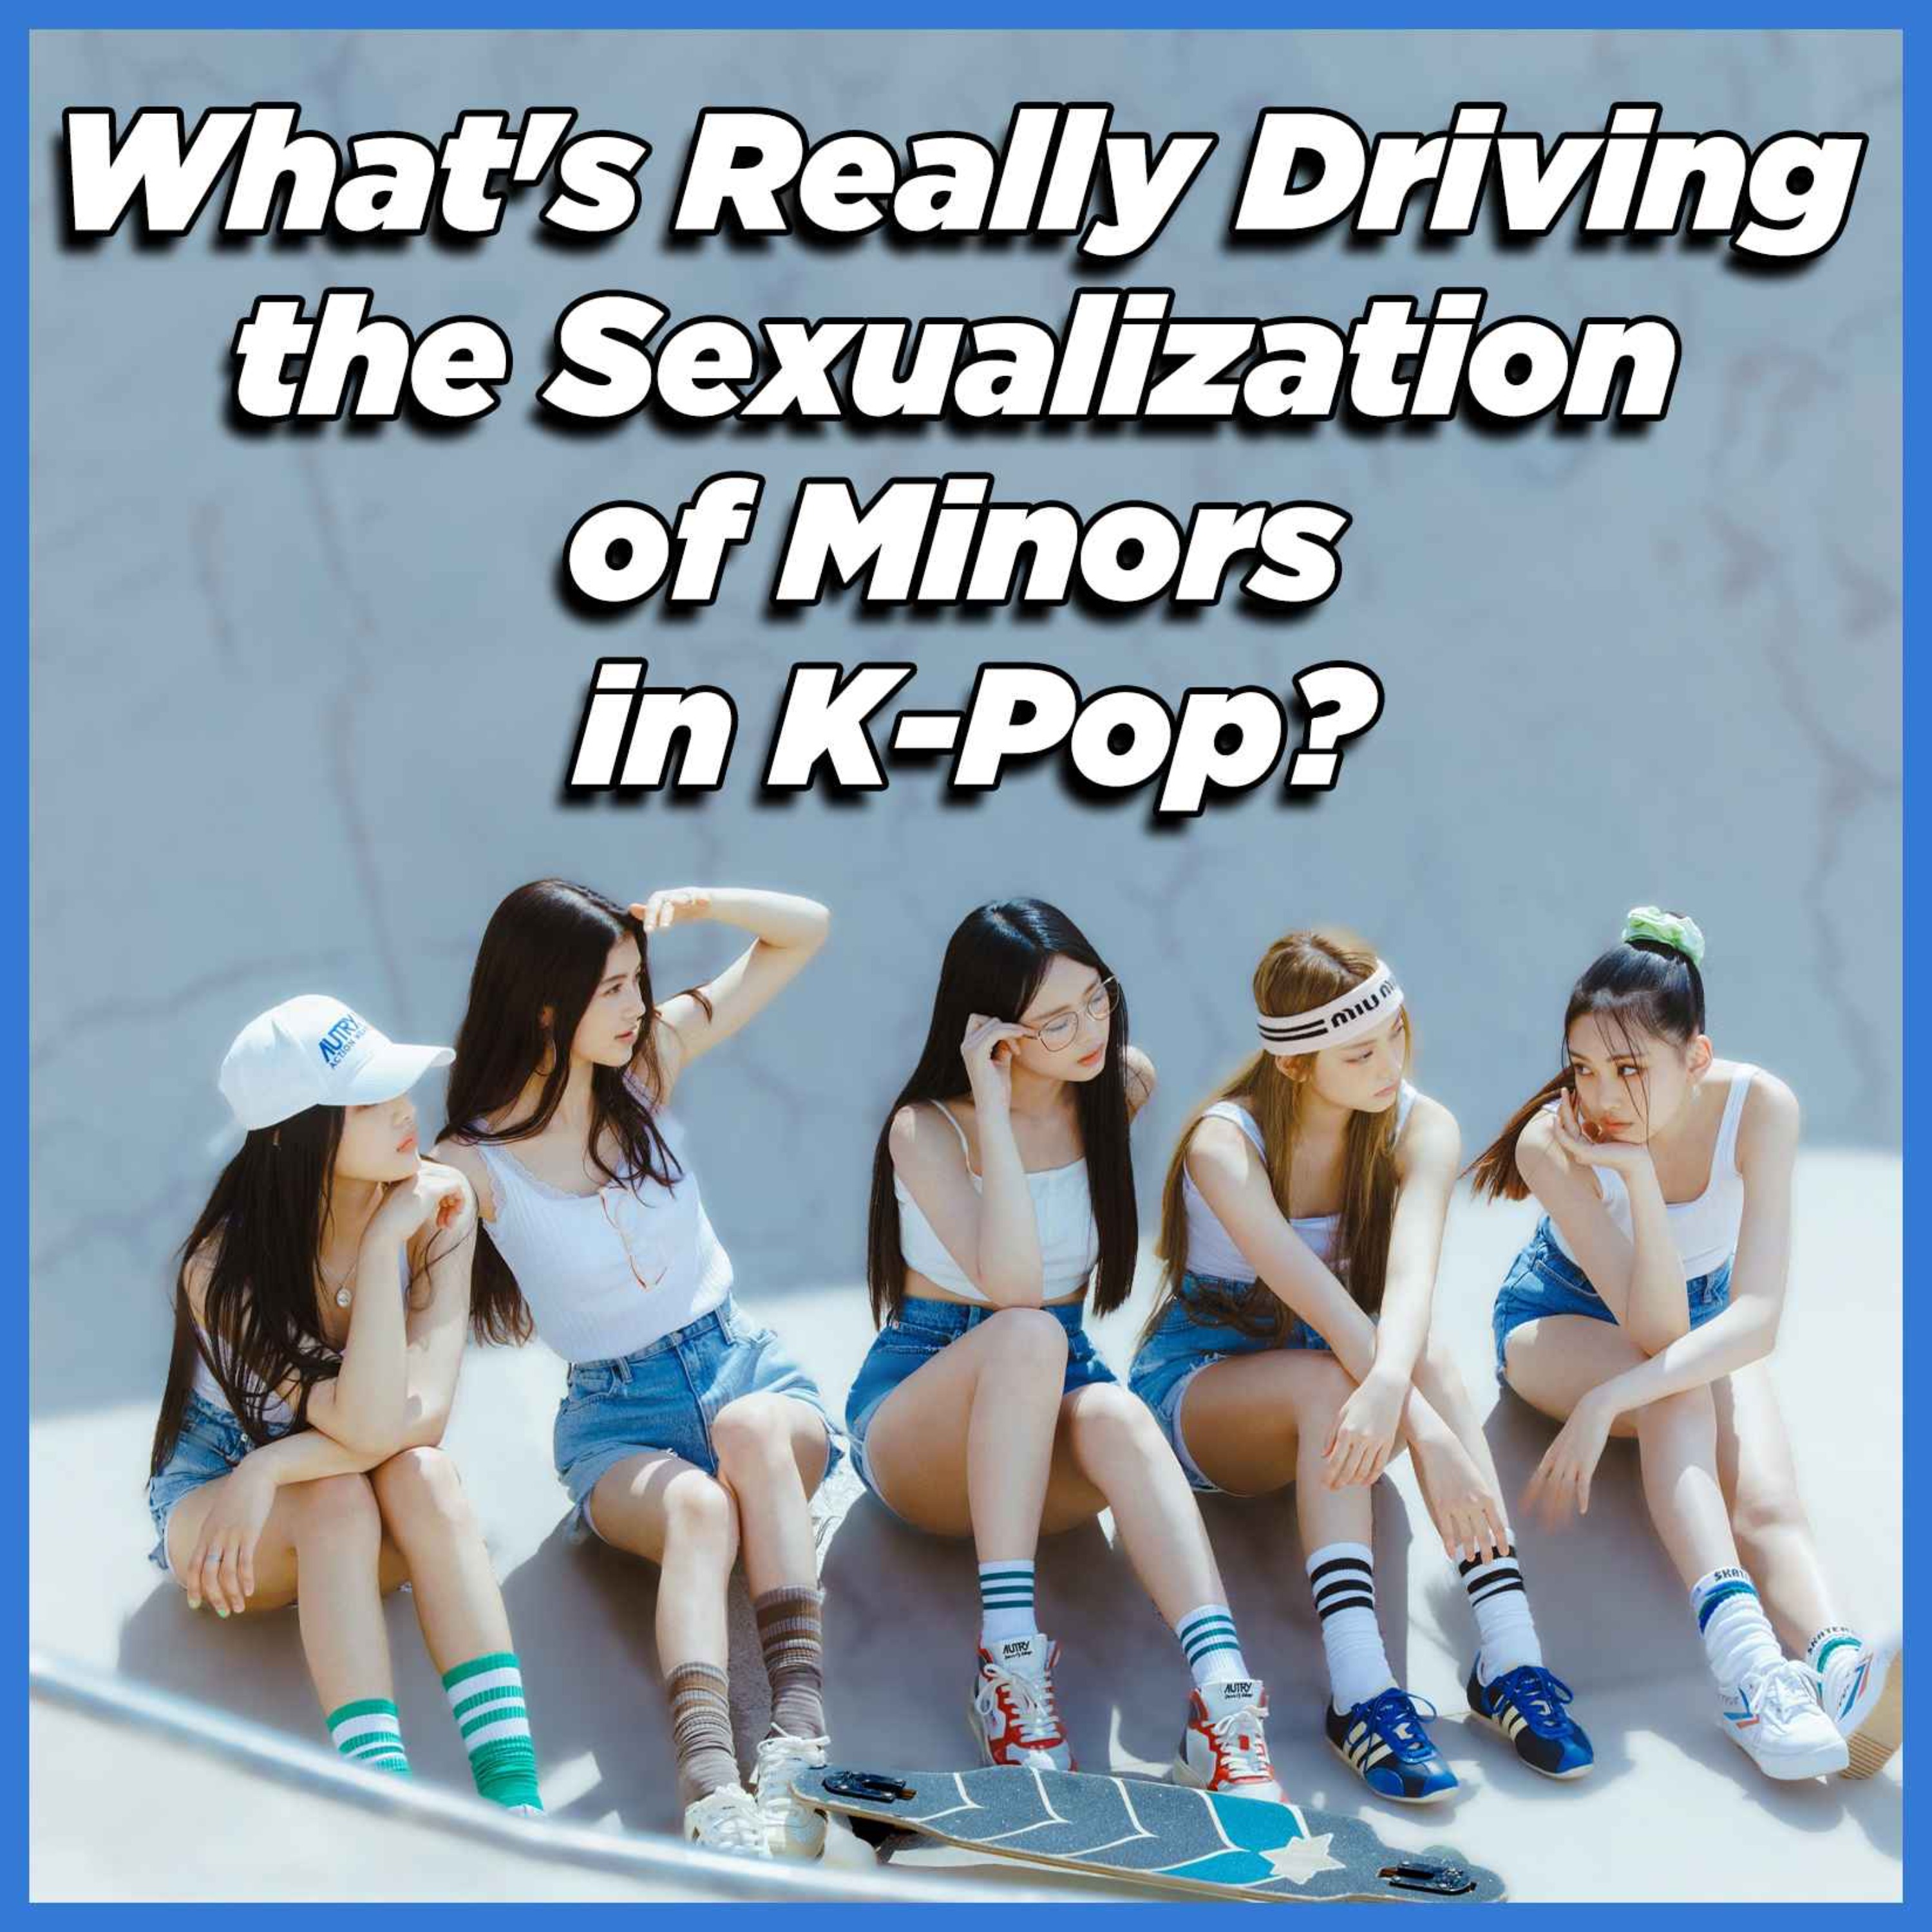 What's Really Driving the Sexualization of Minors in K-Pop?